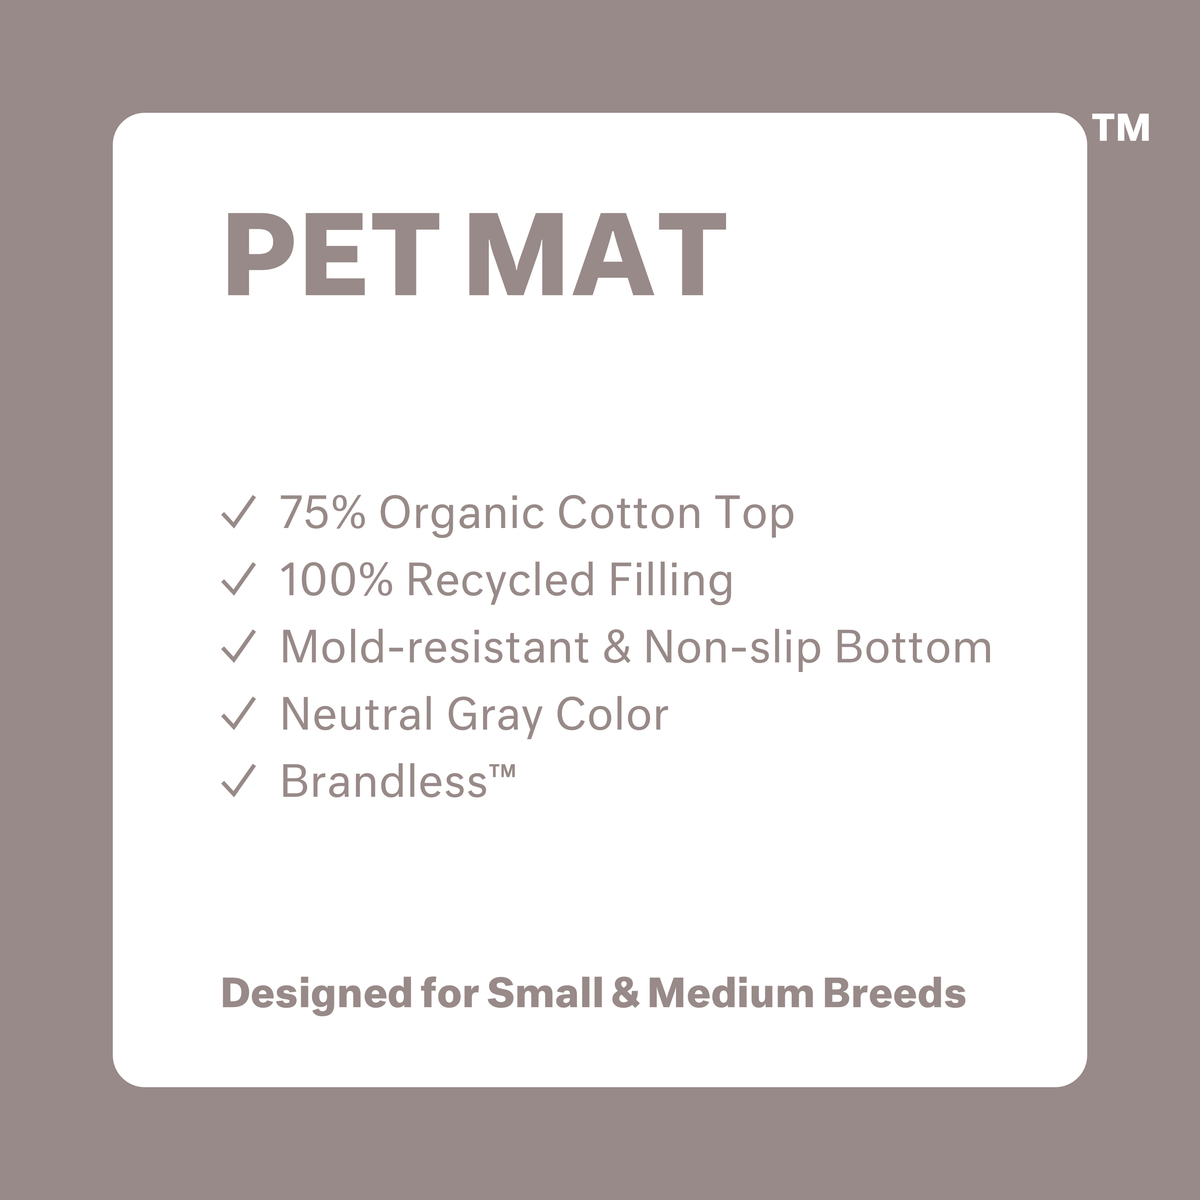 Pet Mat: 75% organic cotton top. 100% recycled filling. Mold resistant and non-slip bottom. Neutral gray color. Brandless. Designed for Small and Medium Breeds.